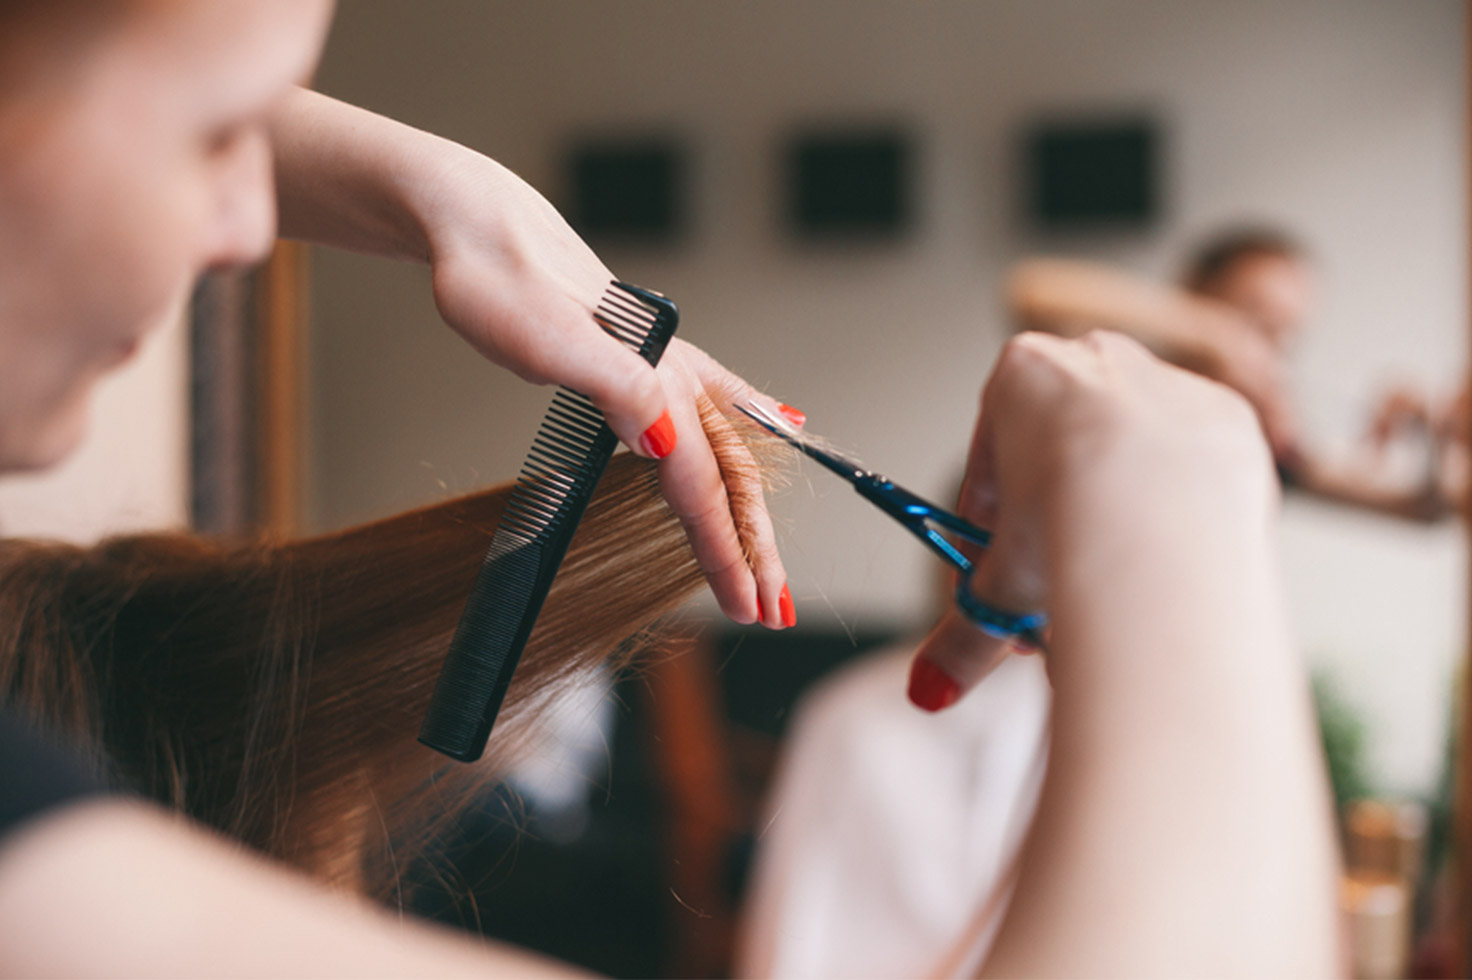 Haircuts and Hairdressing the right thing for you? Read the guide